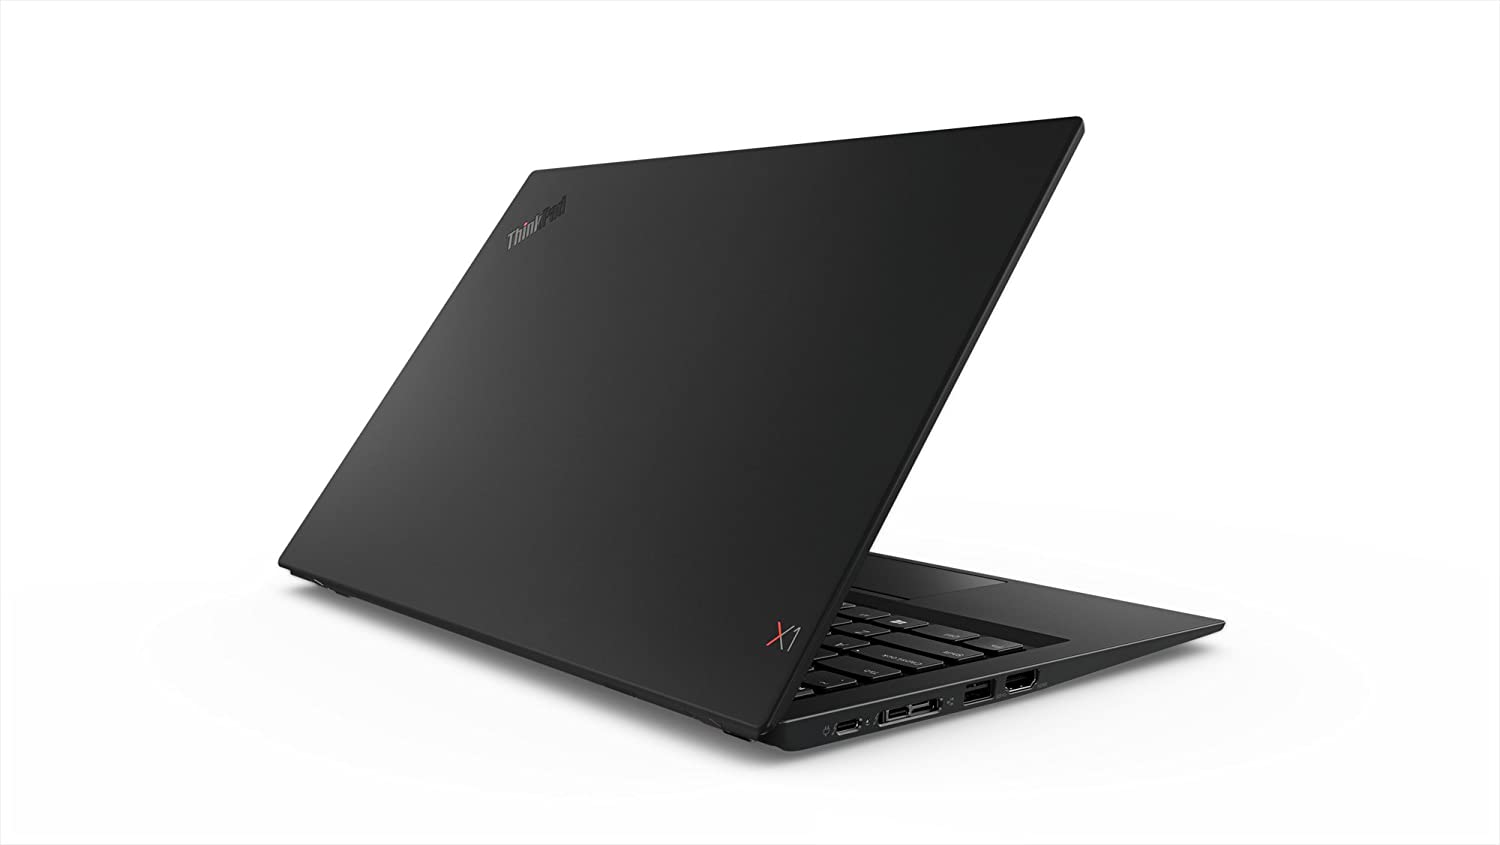 Is the Lenovo X1 a good laptop?